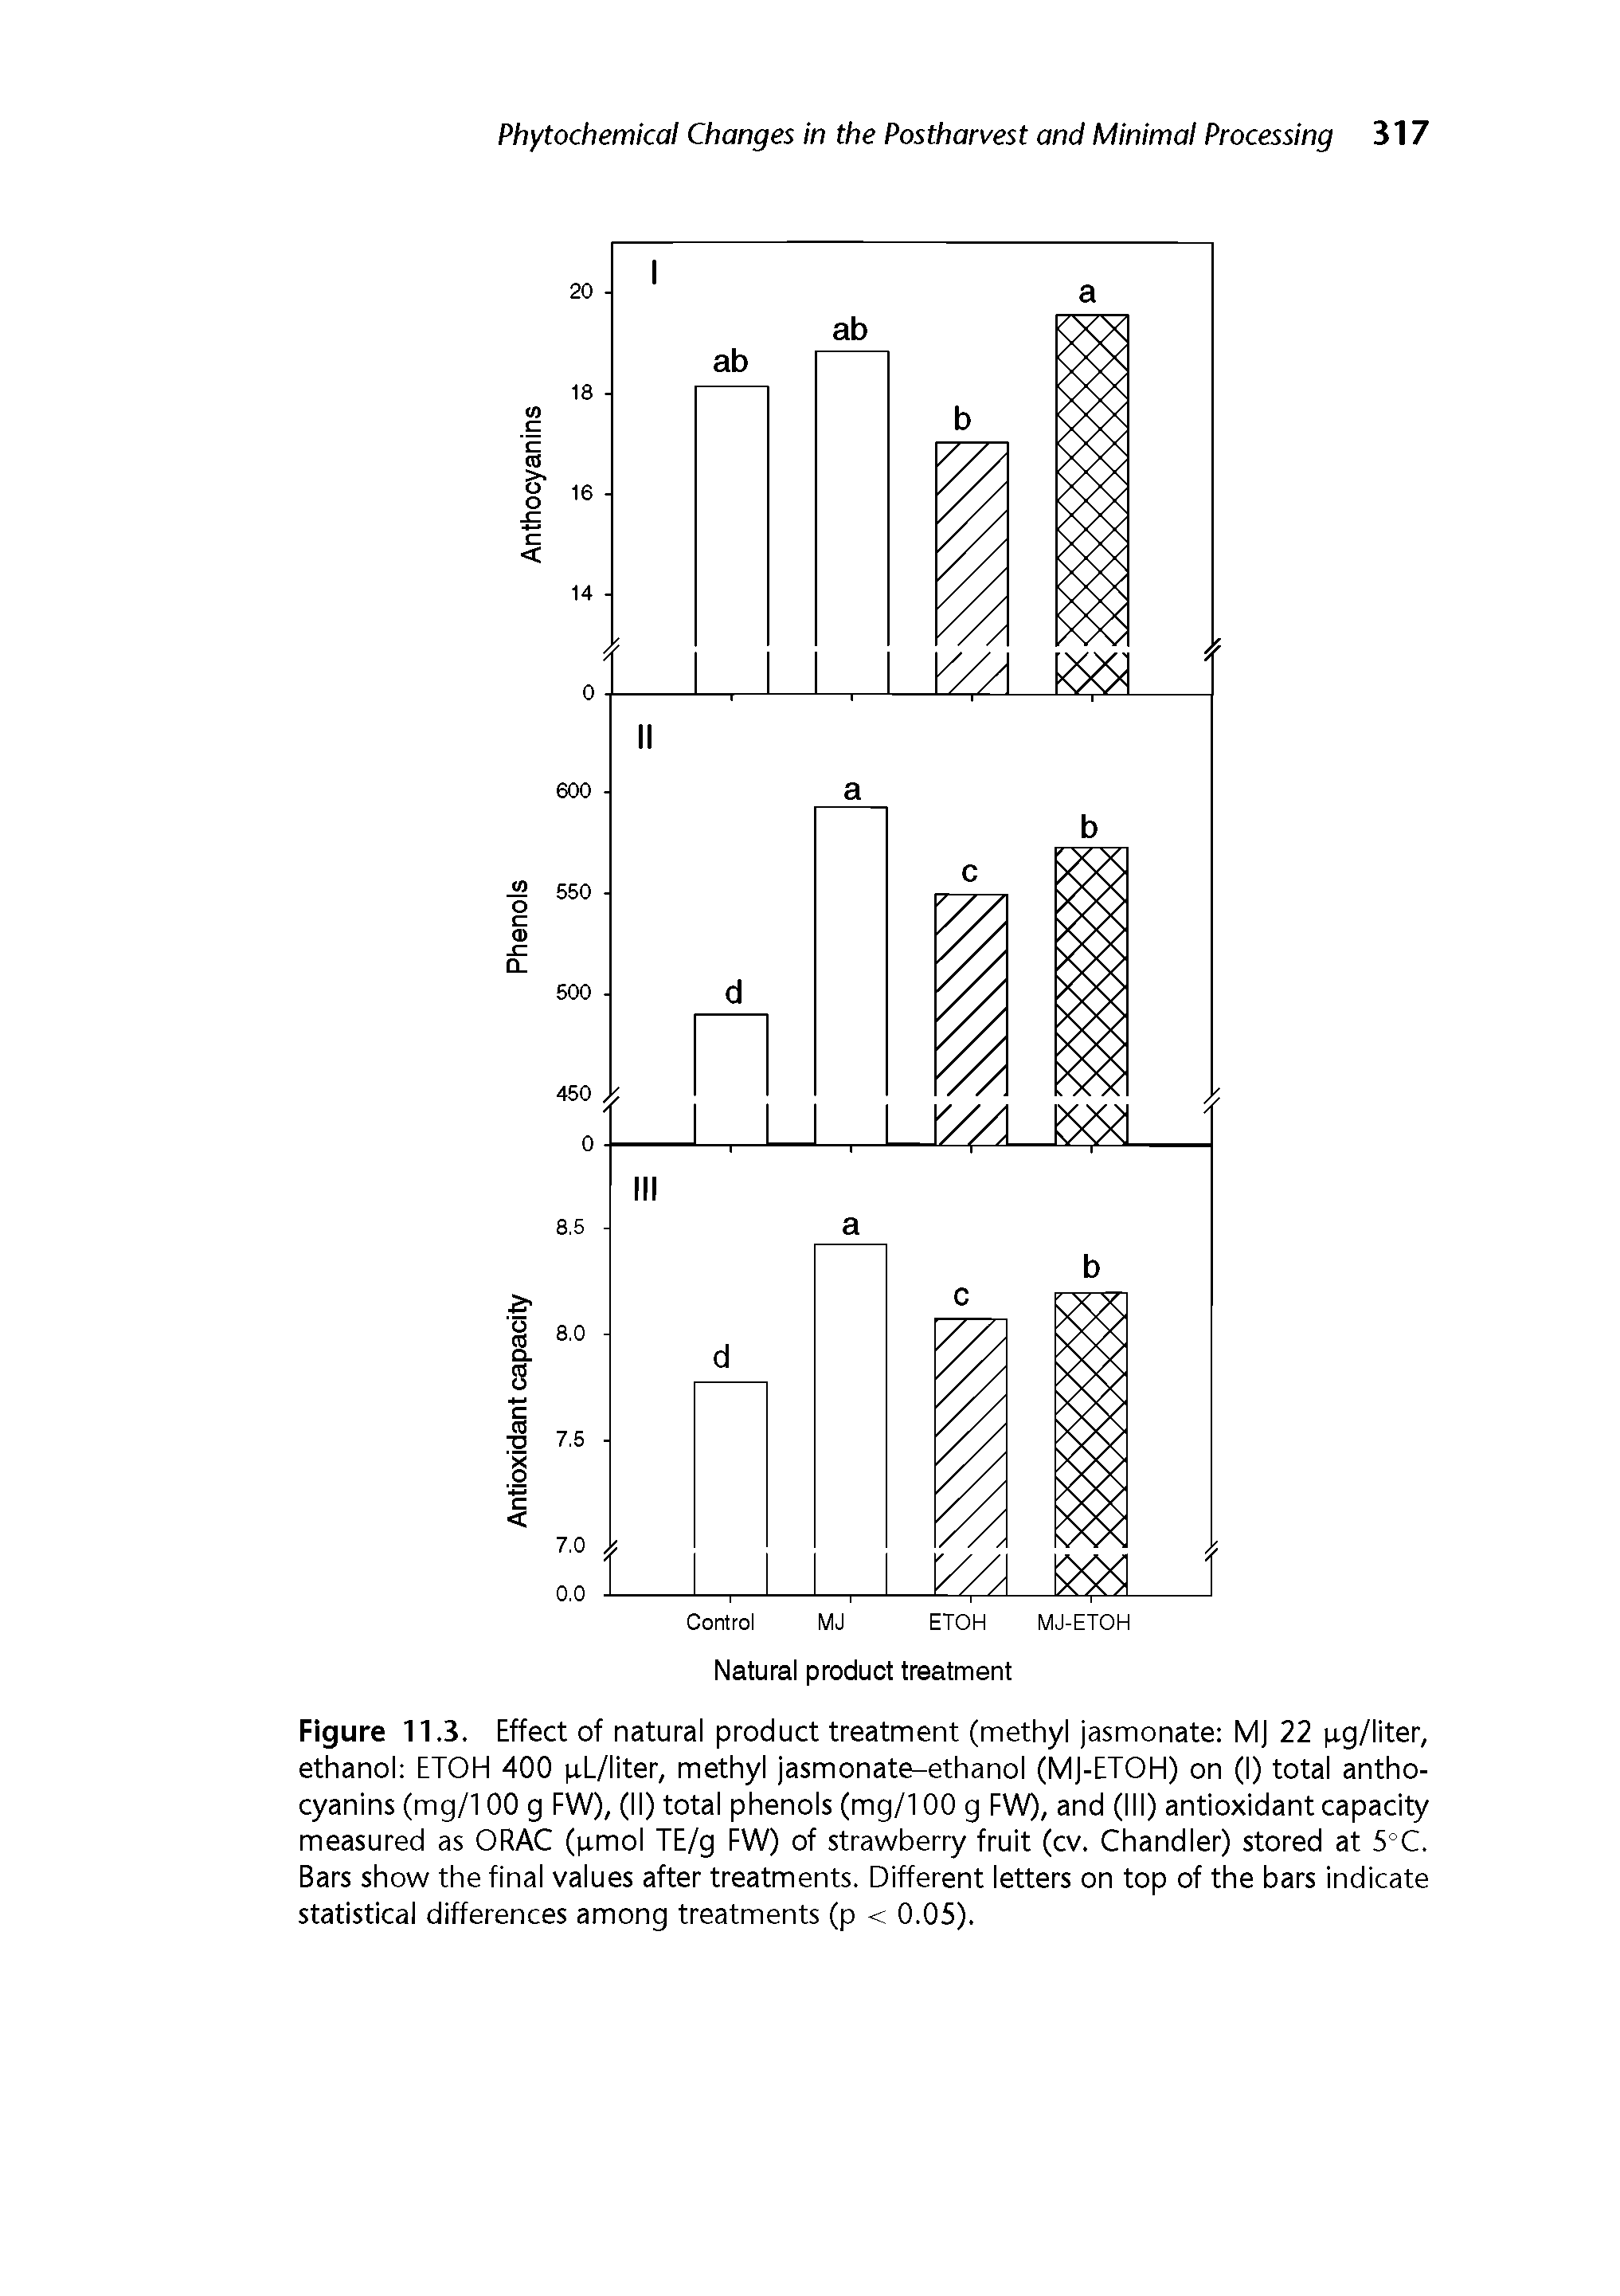 Figure 11.3. Effect of natural product treatment (methyl jasmonate MJ 22 ptg/liter, ethanol ETOH 400 pl/liter, methyl jasmonate-ethanol (MJ-ETOH) on (I) total antho-cyanins (mg/100 g FW), (II) total phenols (mg/100 g FW), and (III) antioxidant capacity measured as ORAC (p.mol TE/g FW) of strawberry fruit (cv. Chandler) stored at 5°C. Bars show the final values after treatments. Different letters on top of the bars indicate statistical differences among treatments (p < 0.05).